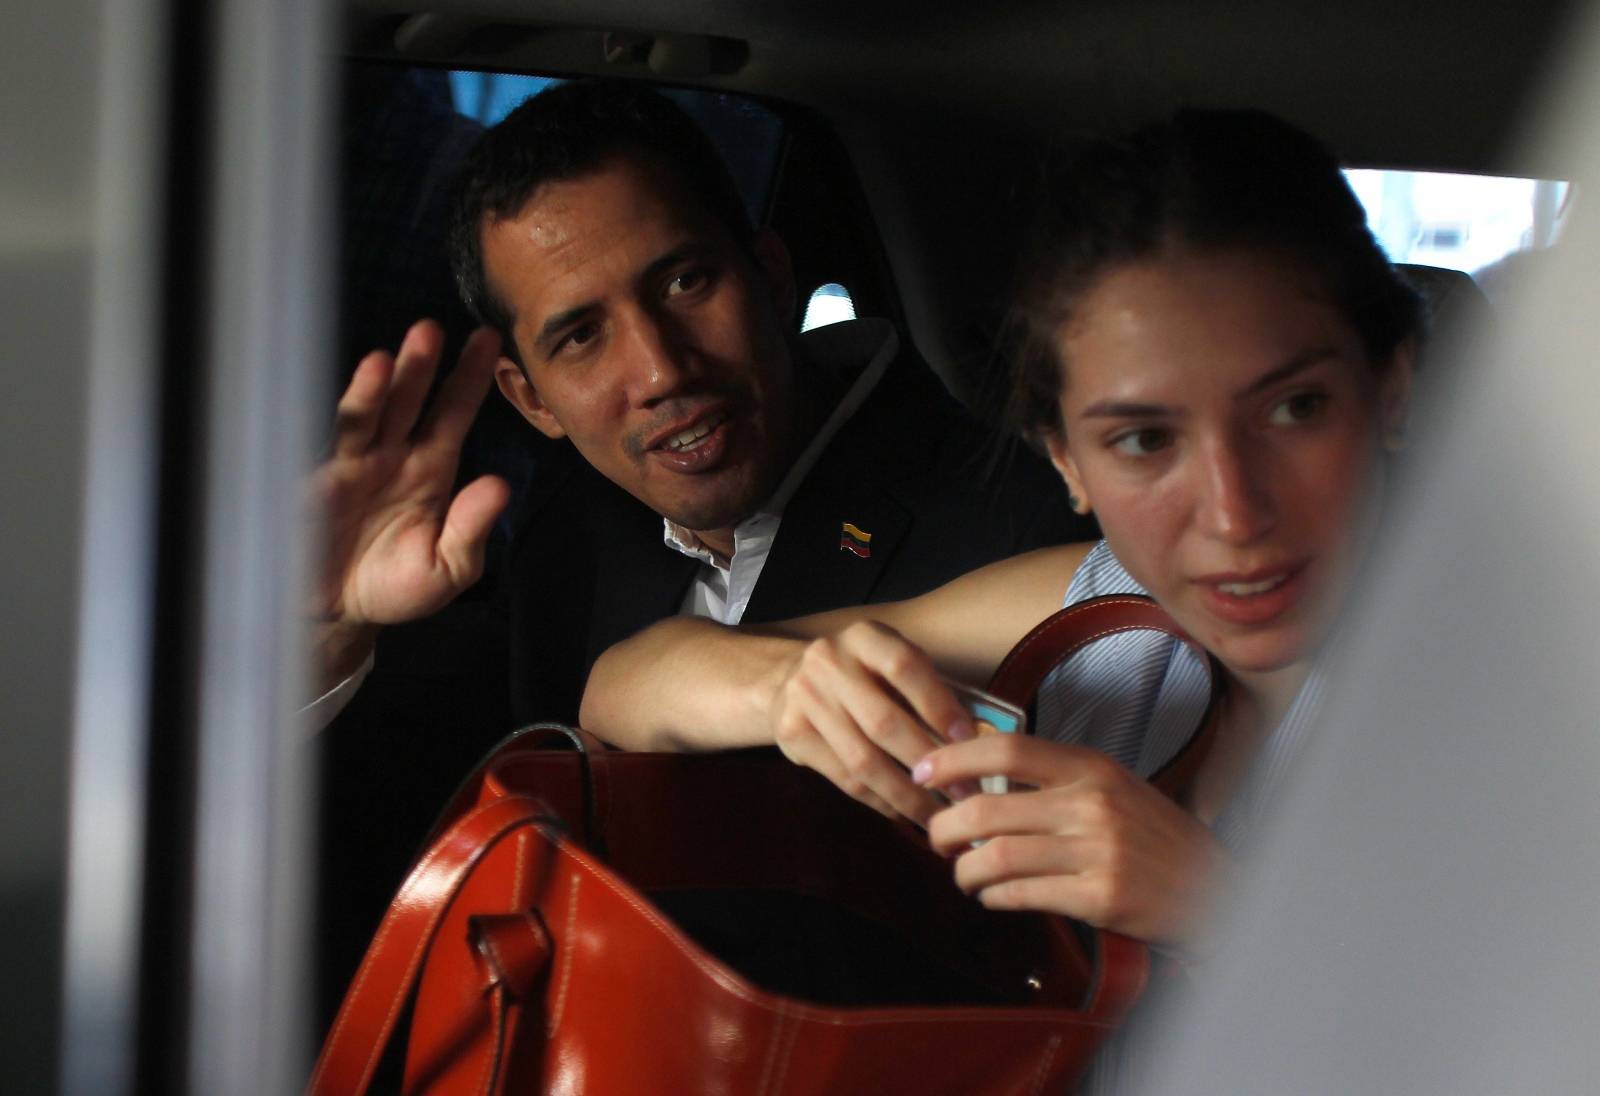 Venezuelan opposition leader Juan Guaido, who many nations have recognized as the country's rightful interim ruler, waves next to his wife Fabiana Rosales while leaving a hotel in Salinas